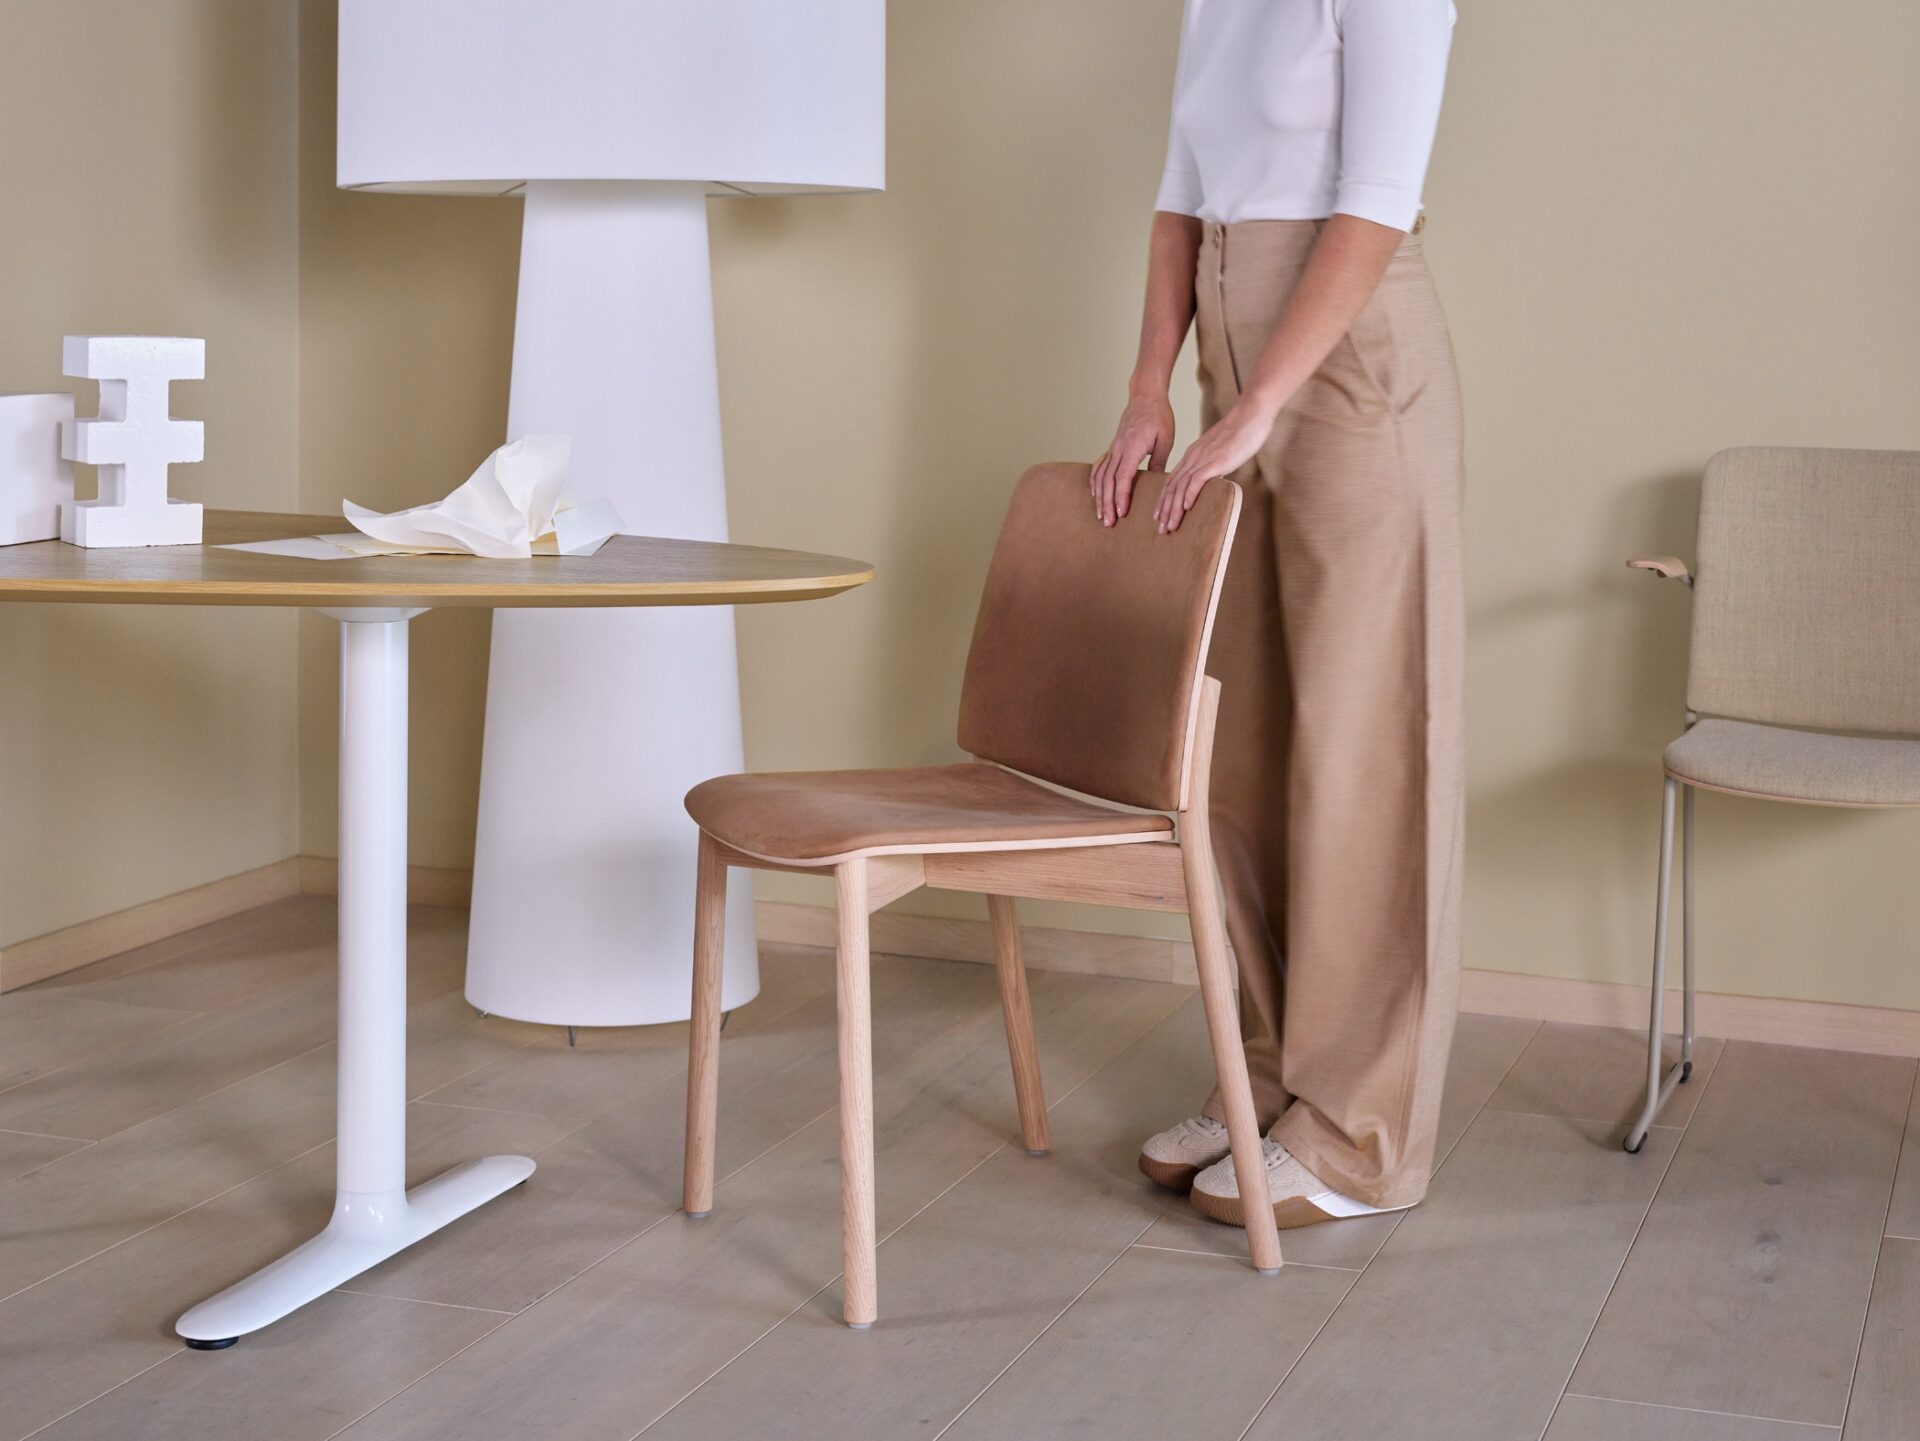 Woman standing behind a chair